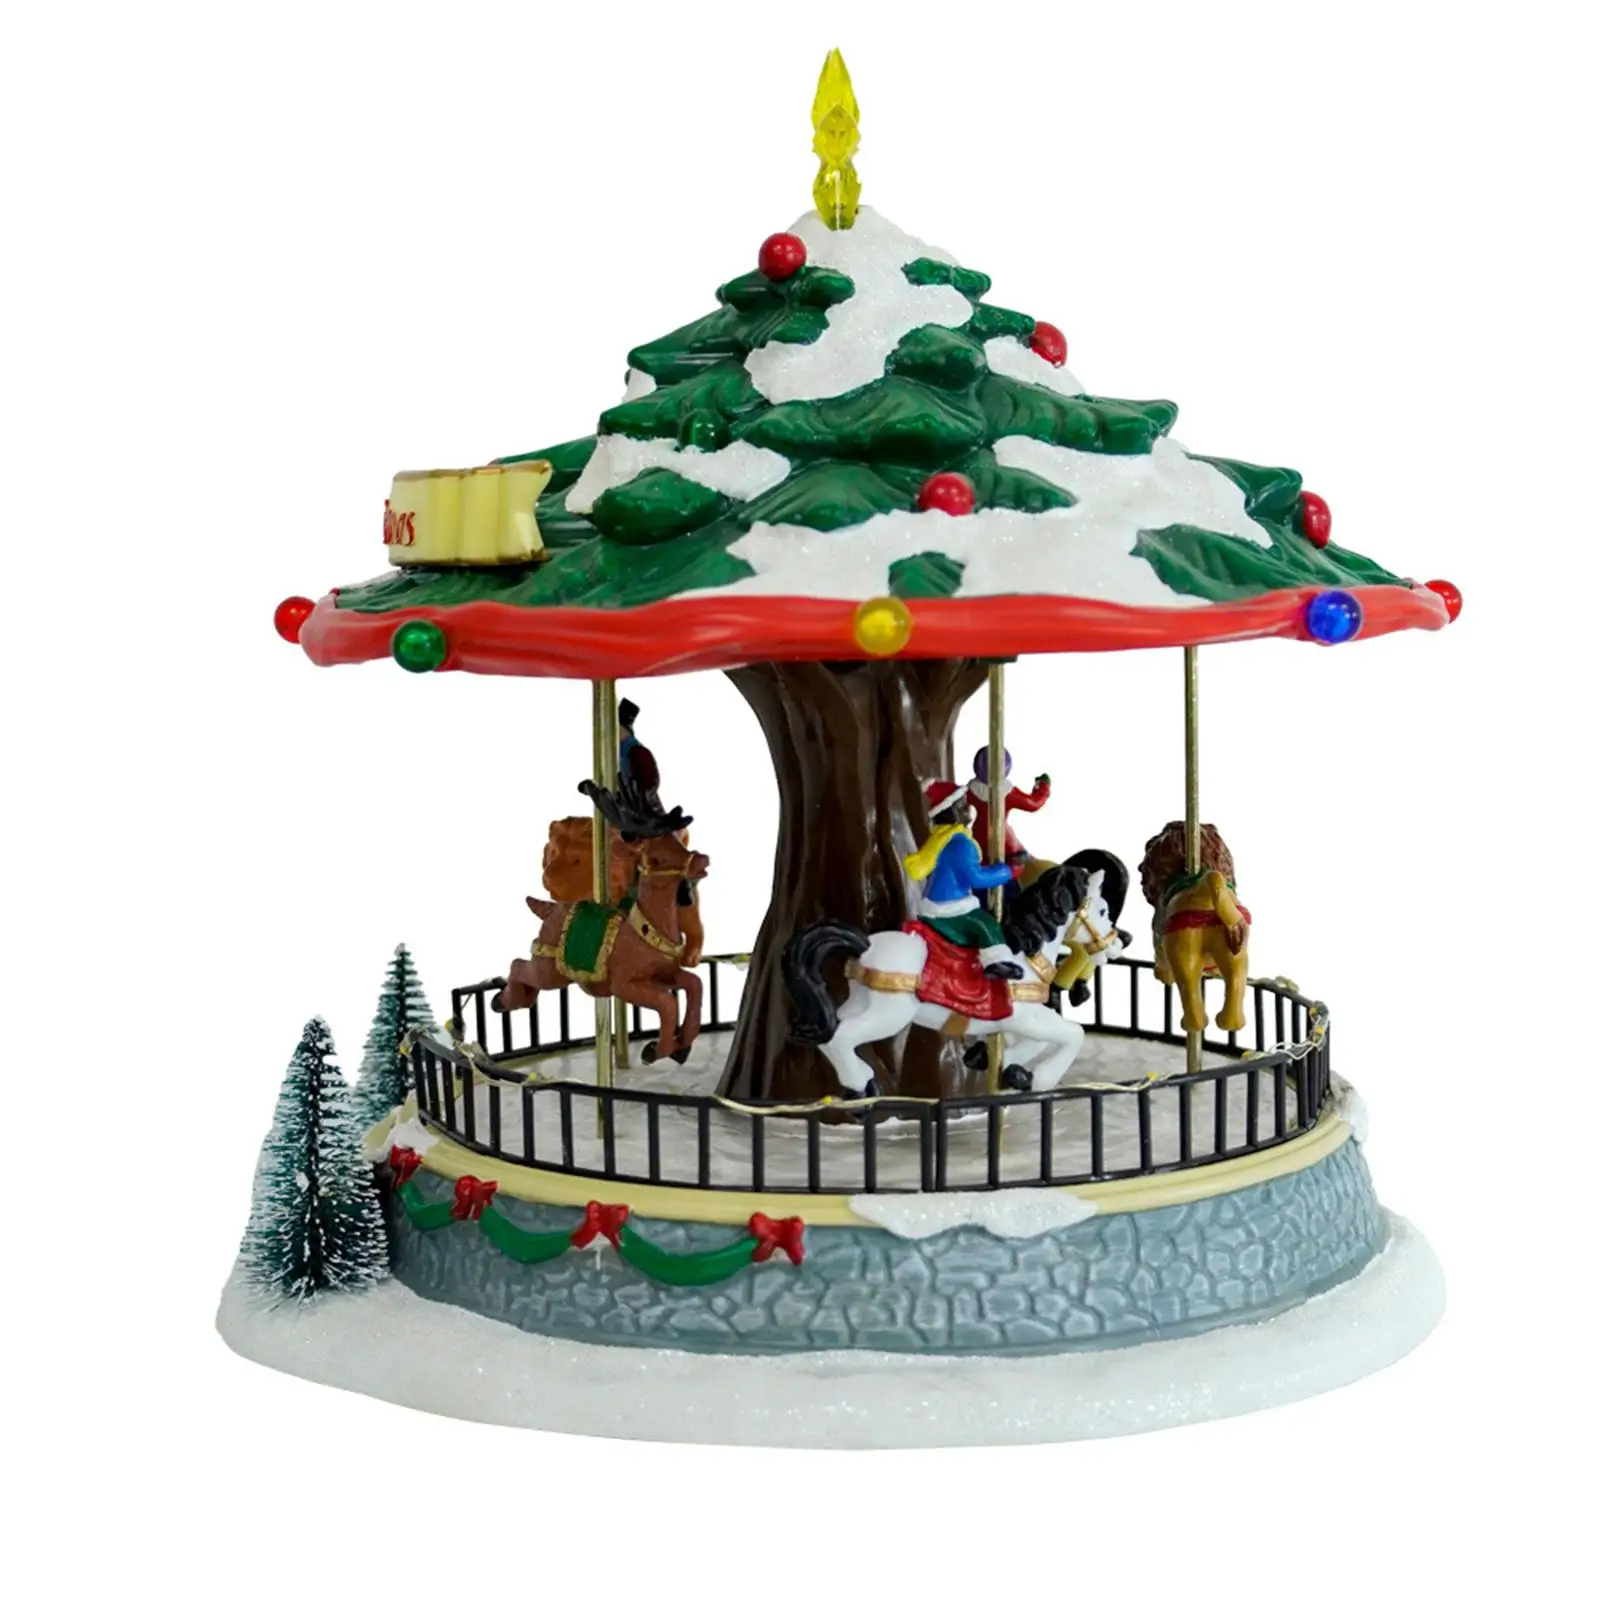 Lighted Christmas Carousel Music Box Carousel Statue Decorative Musical Box Tabletop Ornament for Holiday Indoor Home Decor